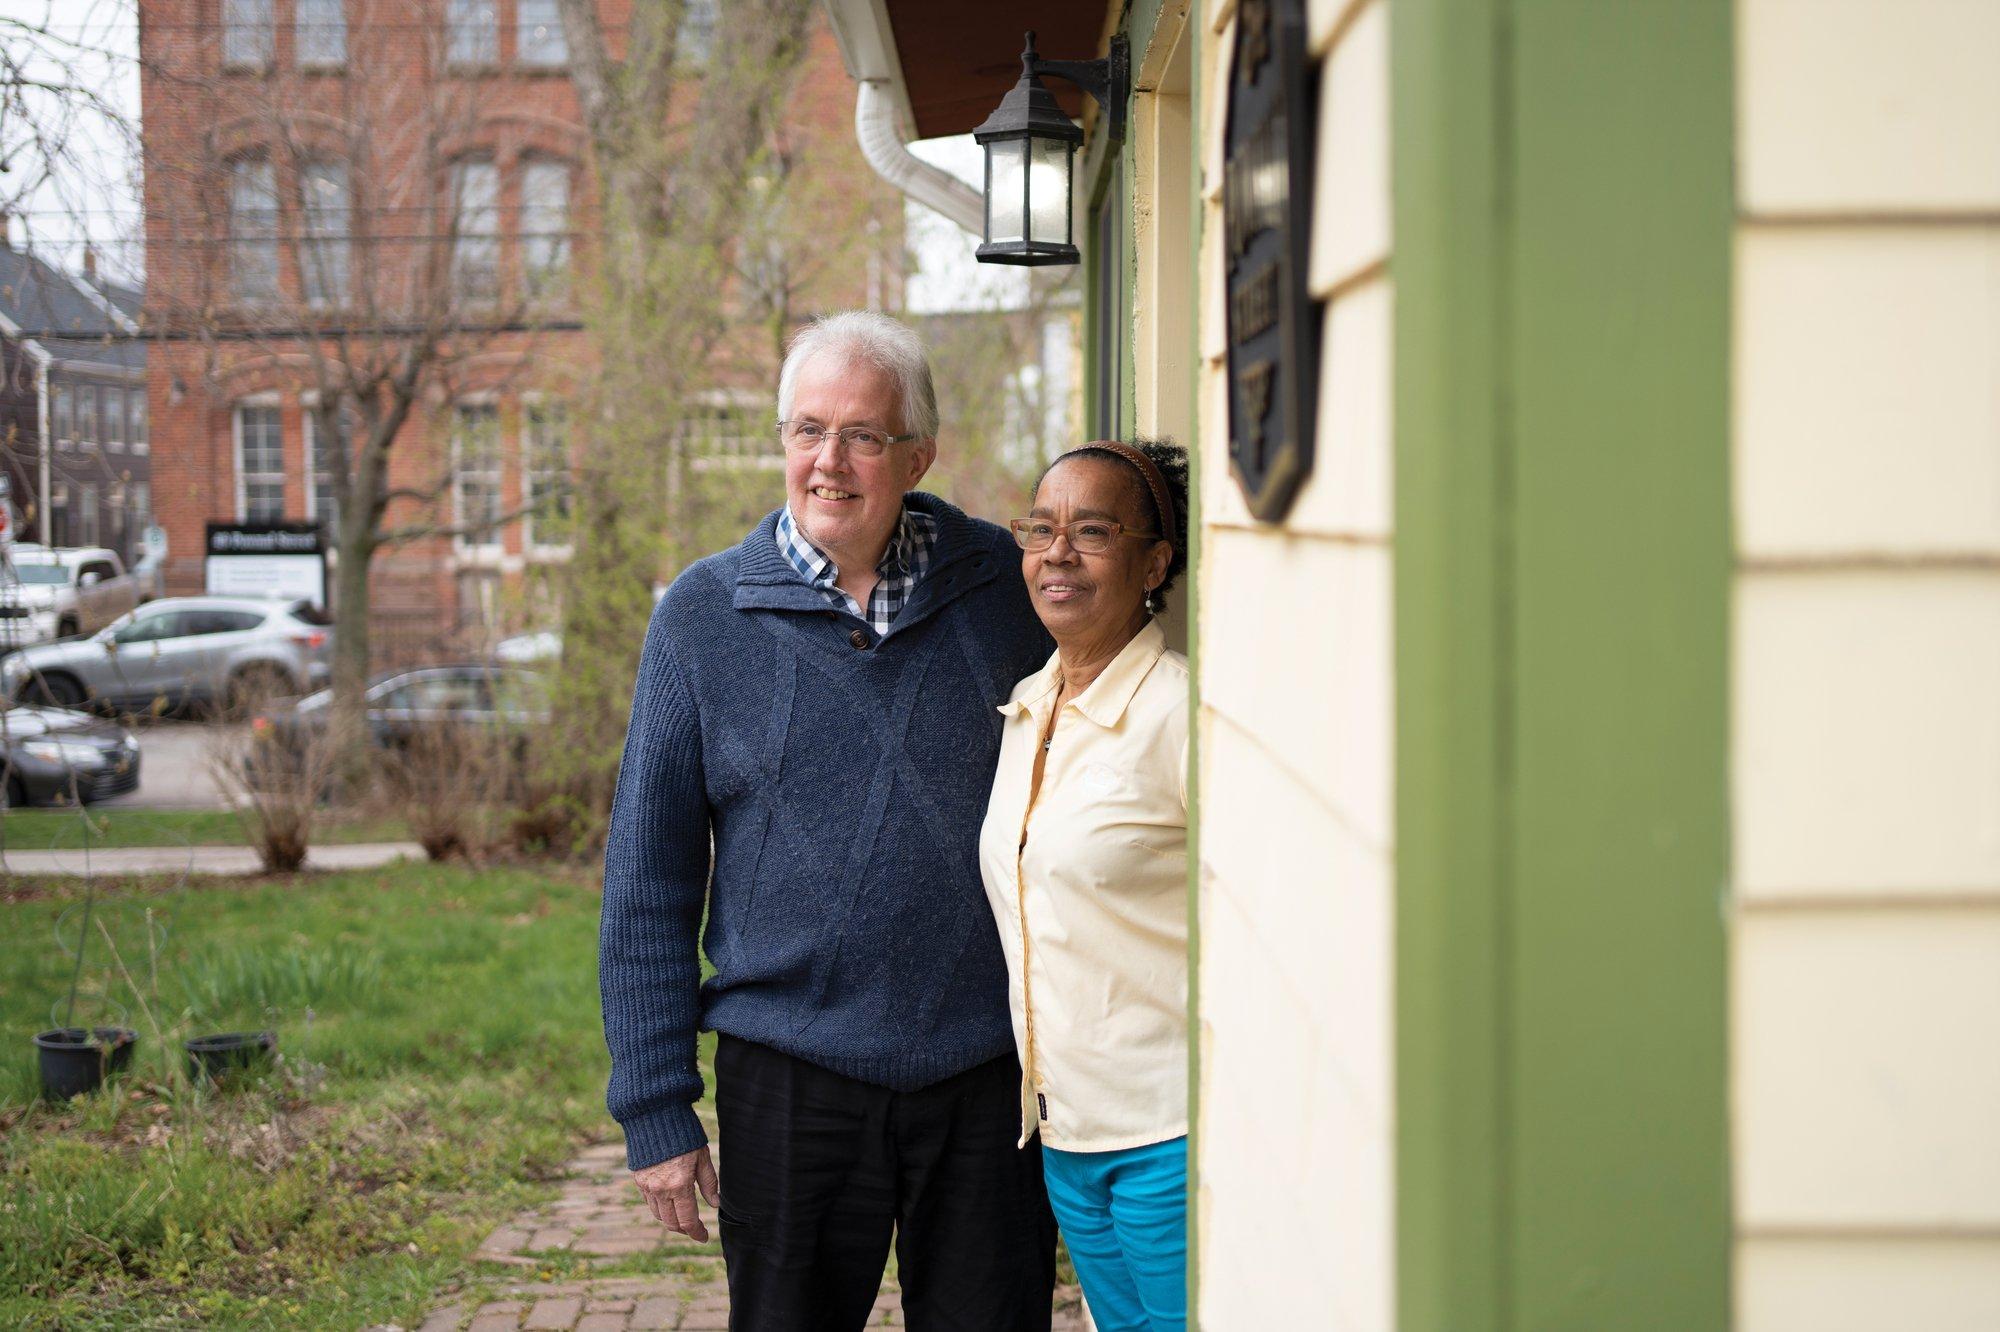 Joe and Rosa Byrne moved to Charlottetown in 1993. At the time, they were one of the only mixed-race couples in the city, and their children were among the only students of colour in their school.